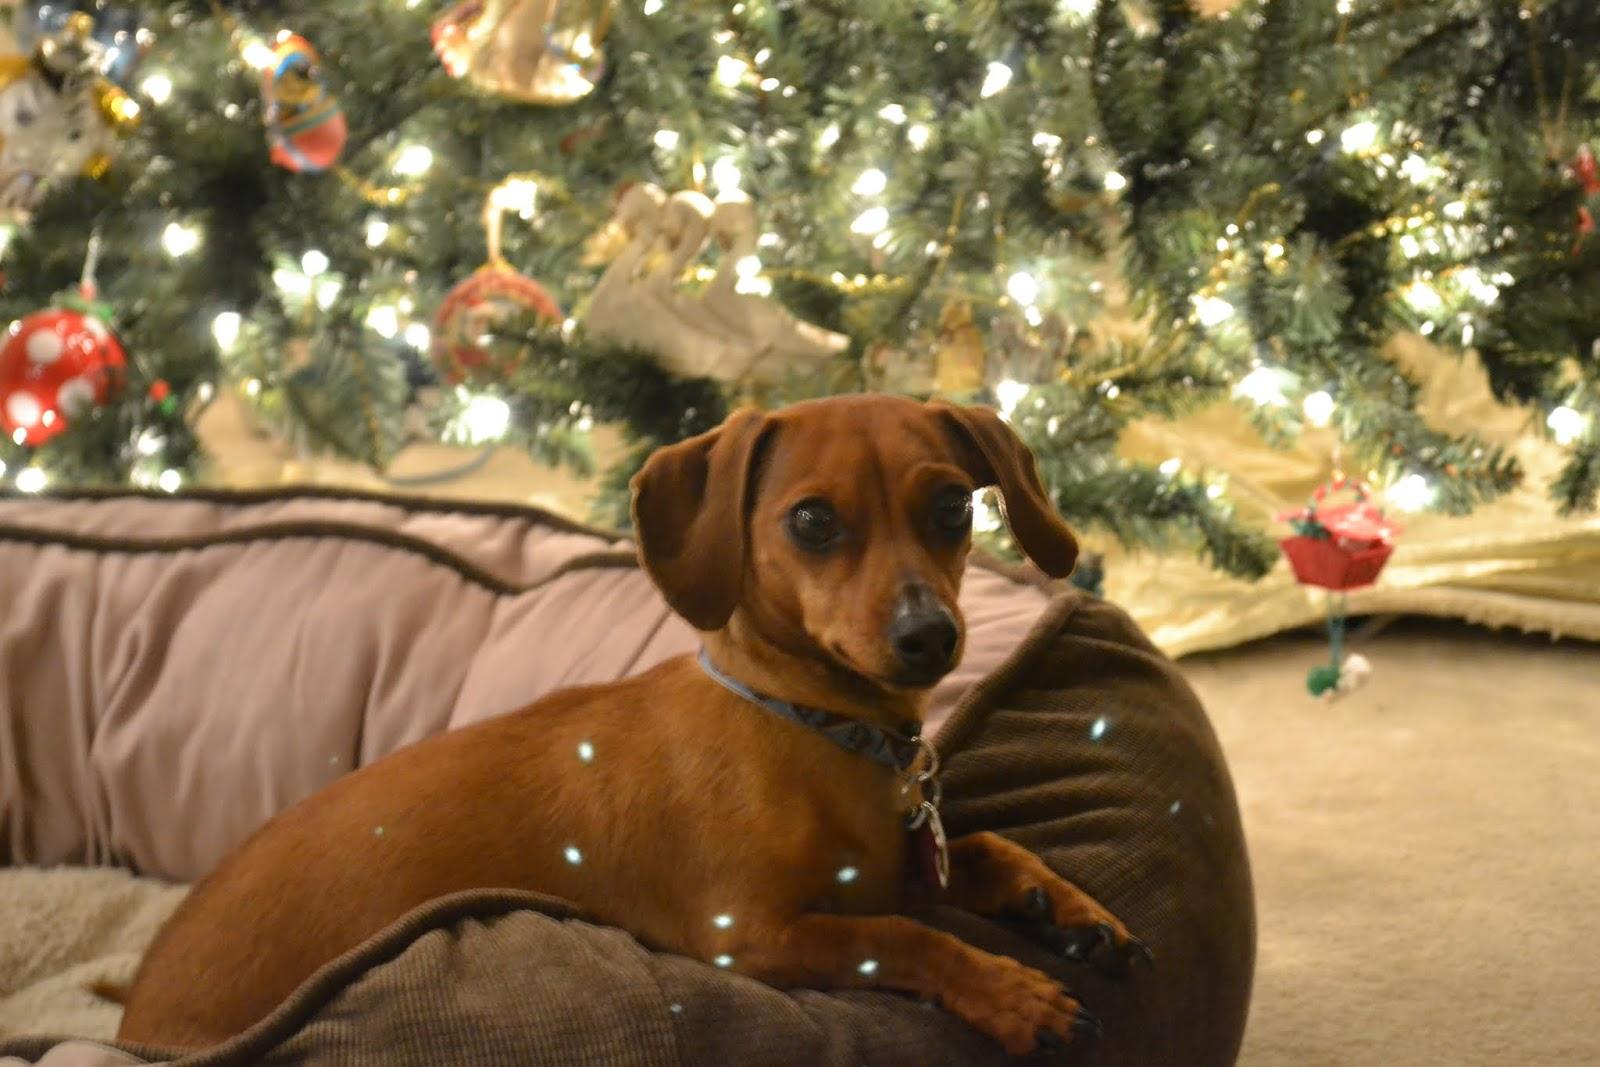 Dachshund at the Christmas tree photo and wallpaper. Beautiful